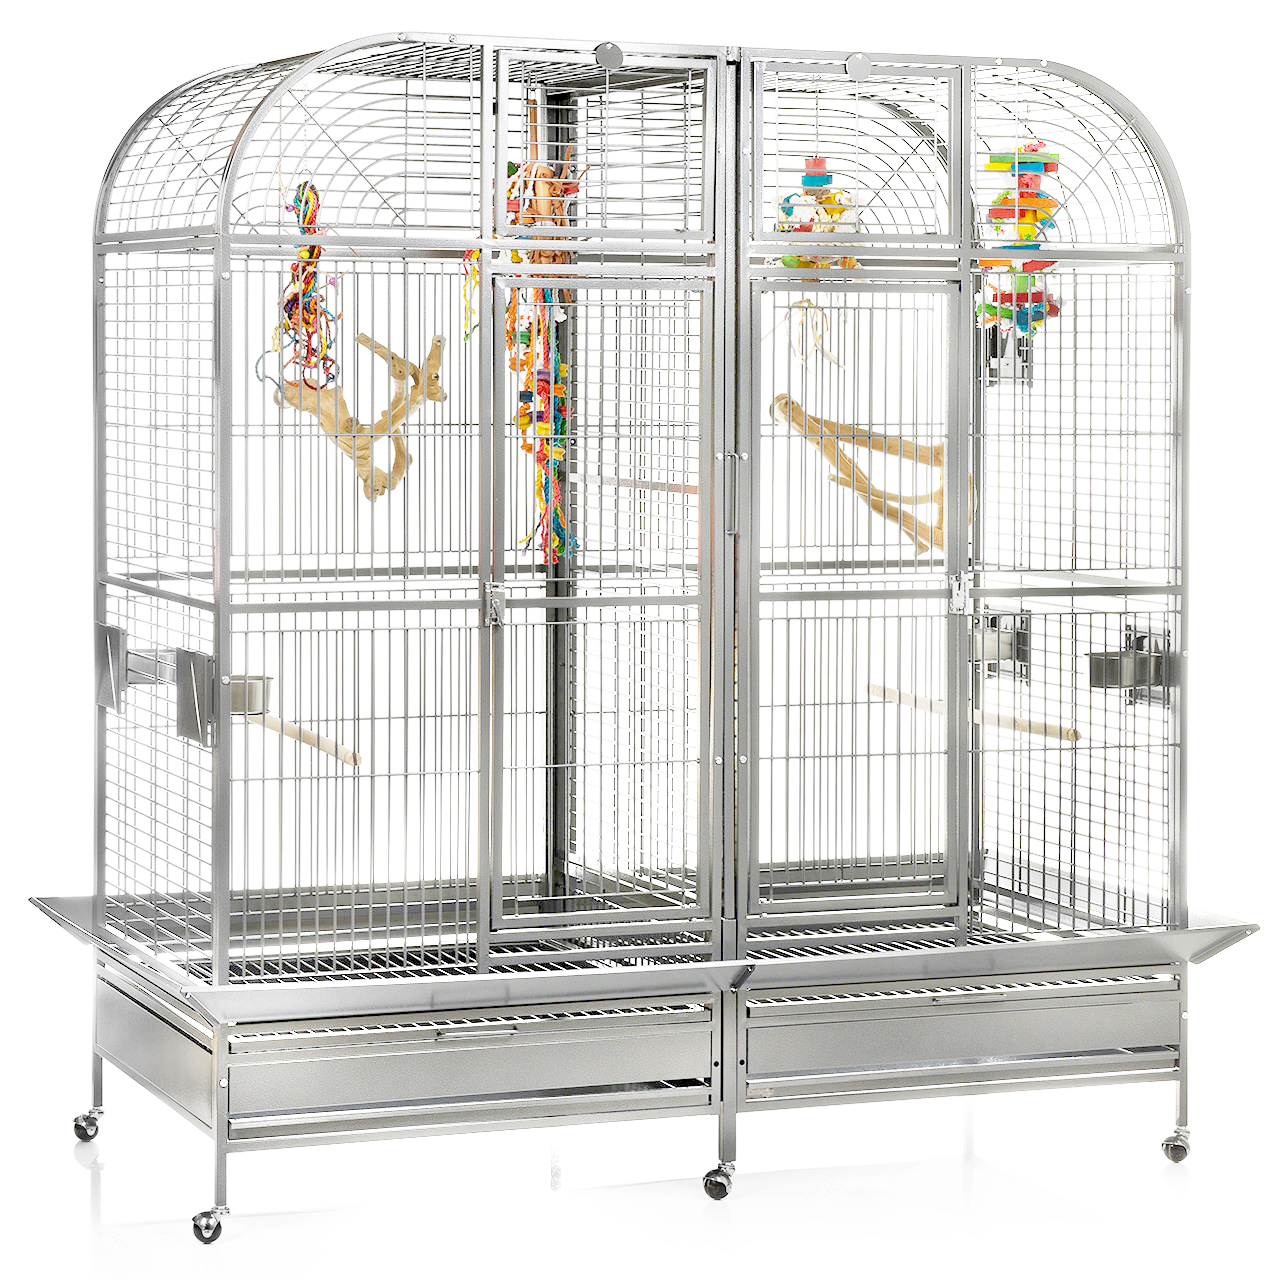 Macaw Bird Cages, Bird Cages for Macaws, Large Macaw Cages, Large